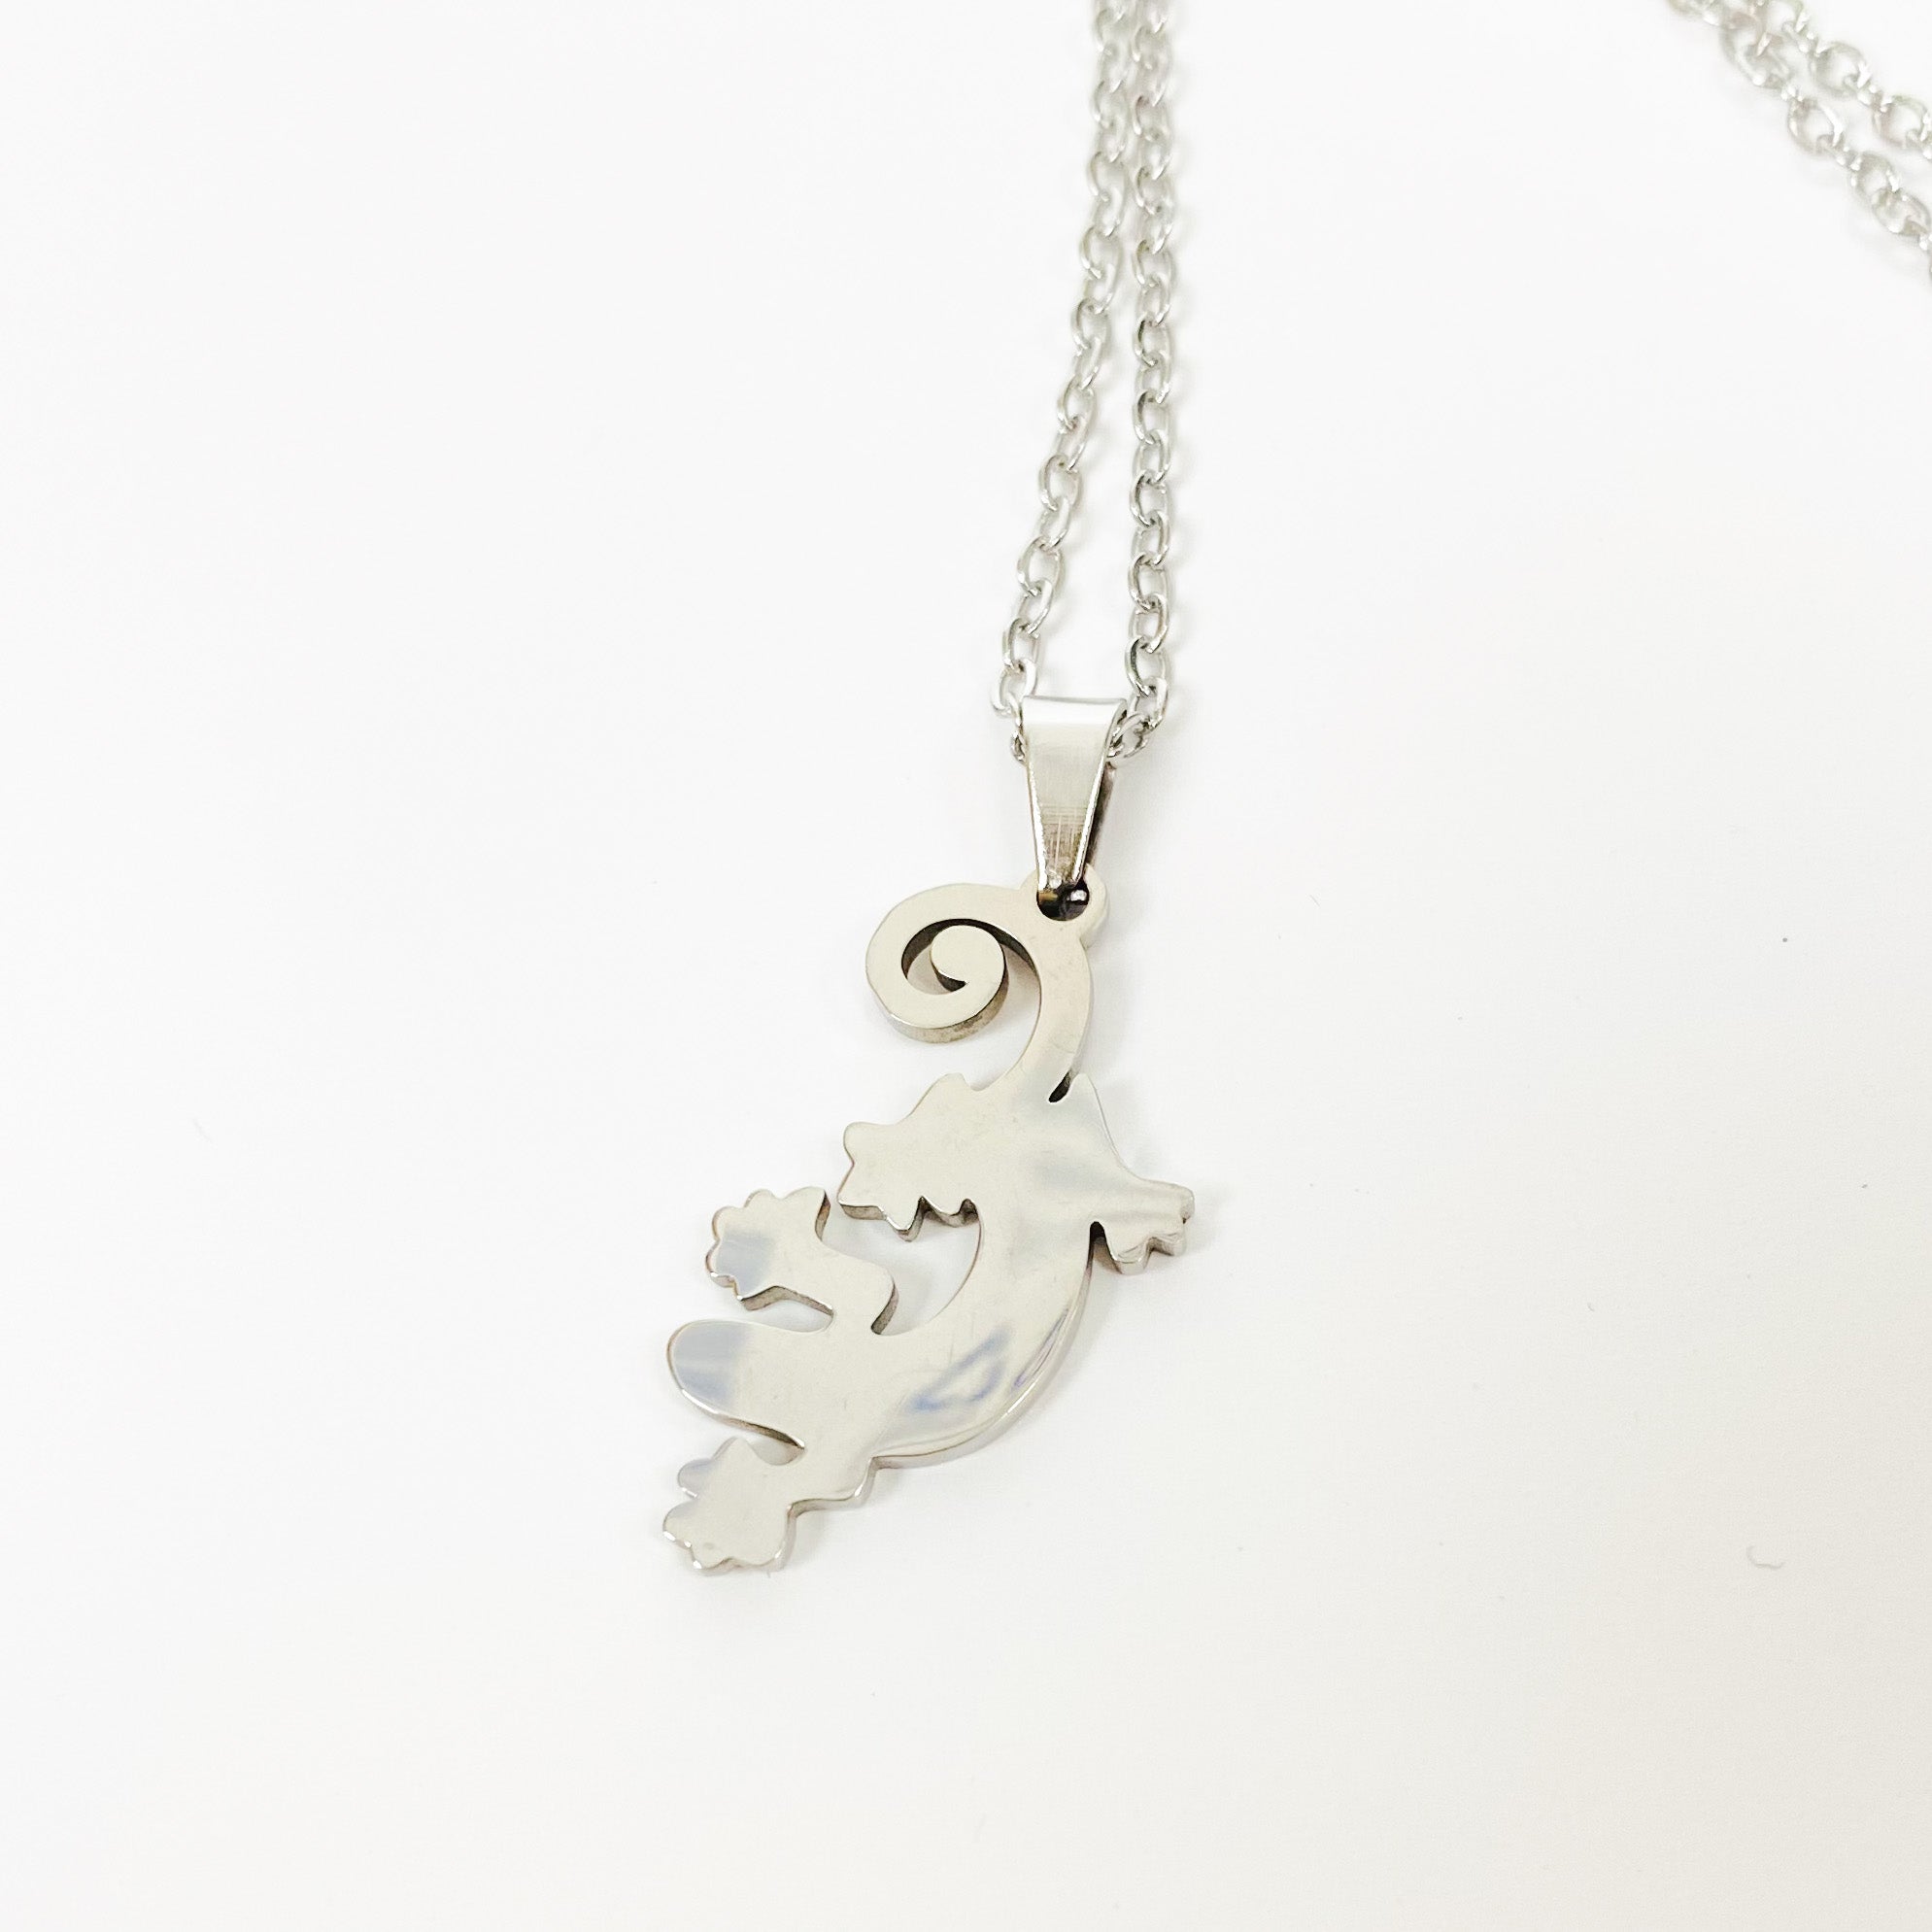 Lizard Charm Necklace Chain Silver